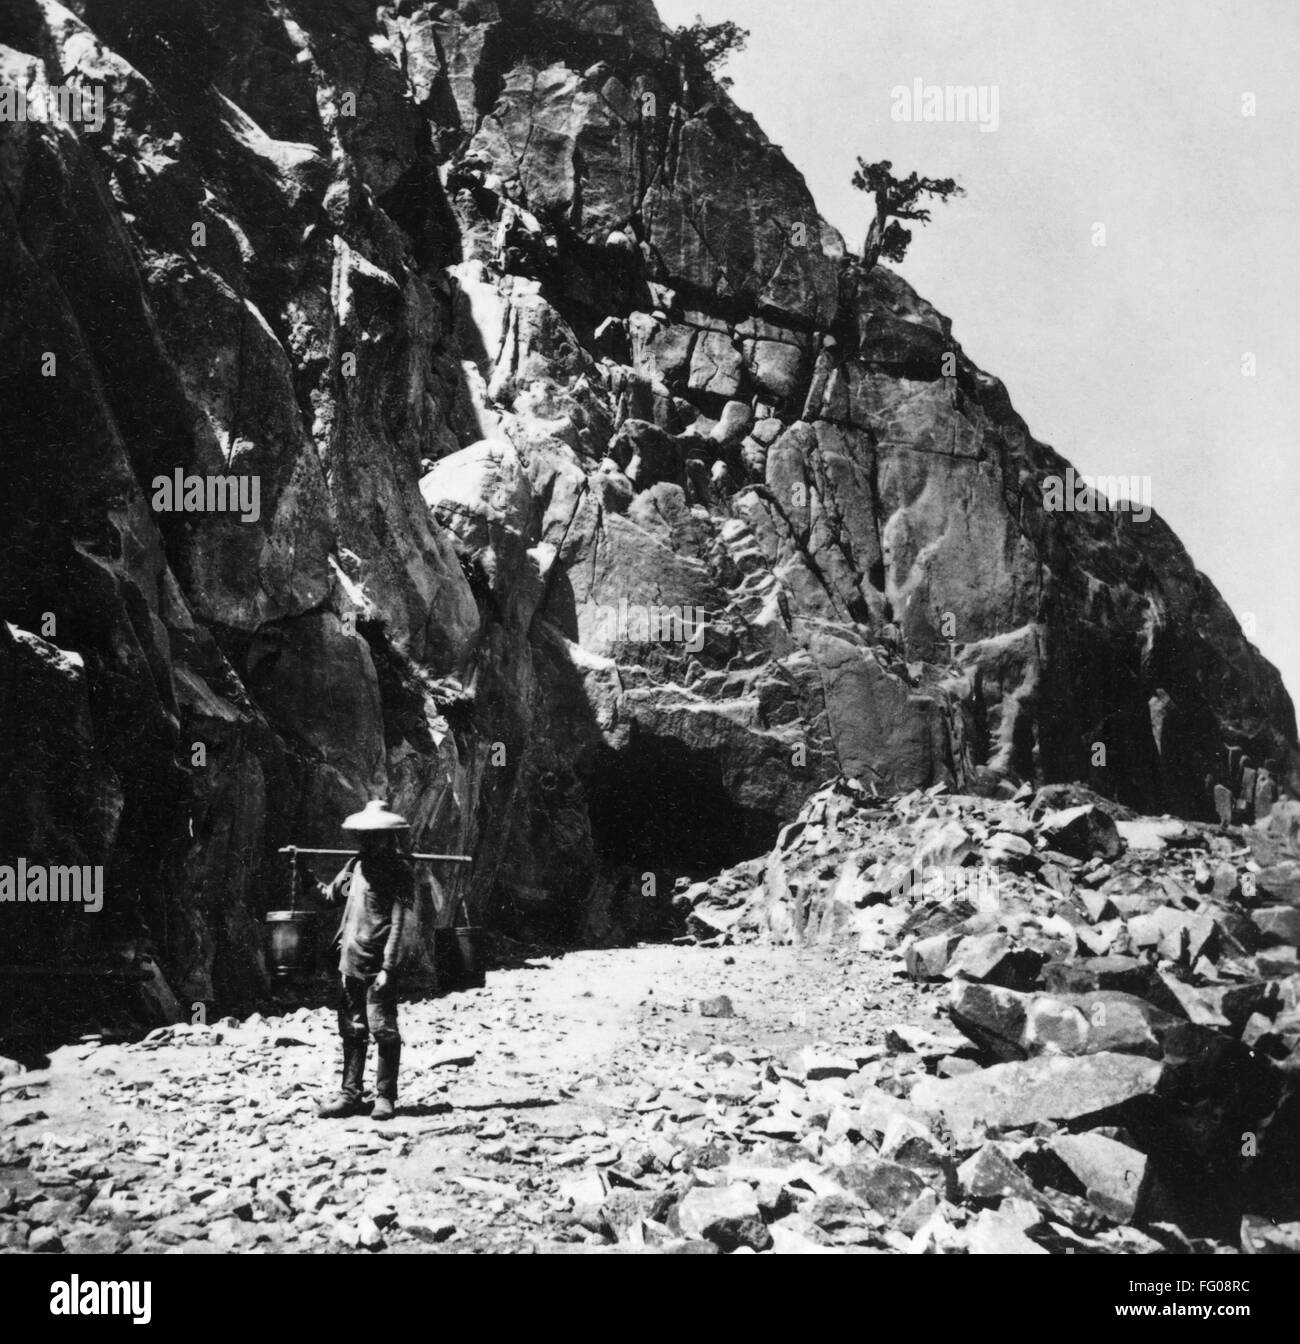 RAILROAD CONSTRUCTION. /n'Heading of east portal Tunnel No. 8.' A Chinese man working on the construction of the Central Pacific Railroad in the Sierra Nevada mountains, California. Photograph by Alfred Hart, c1868. Stock Photo